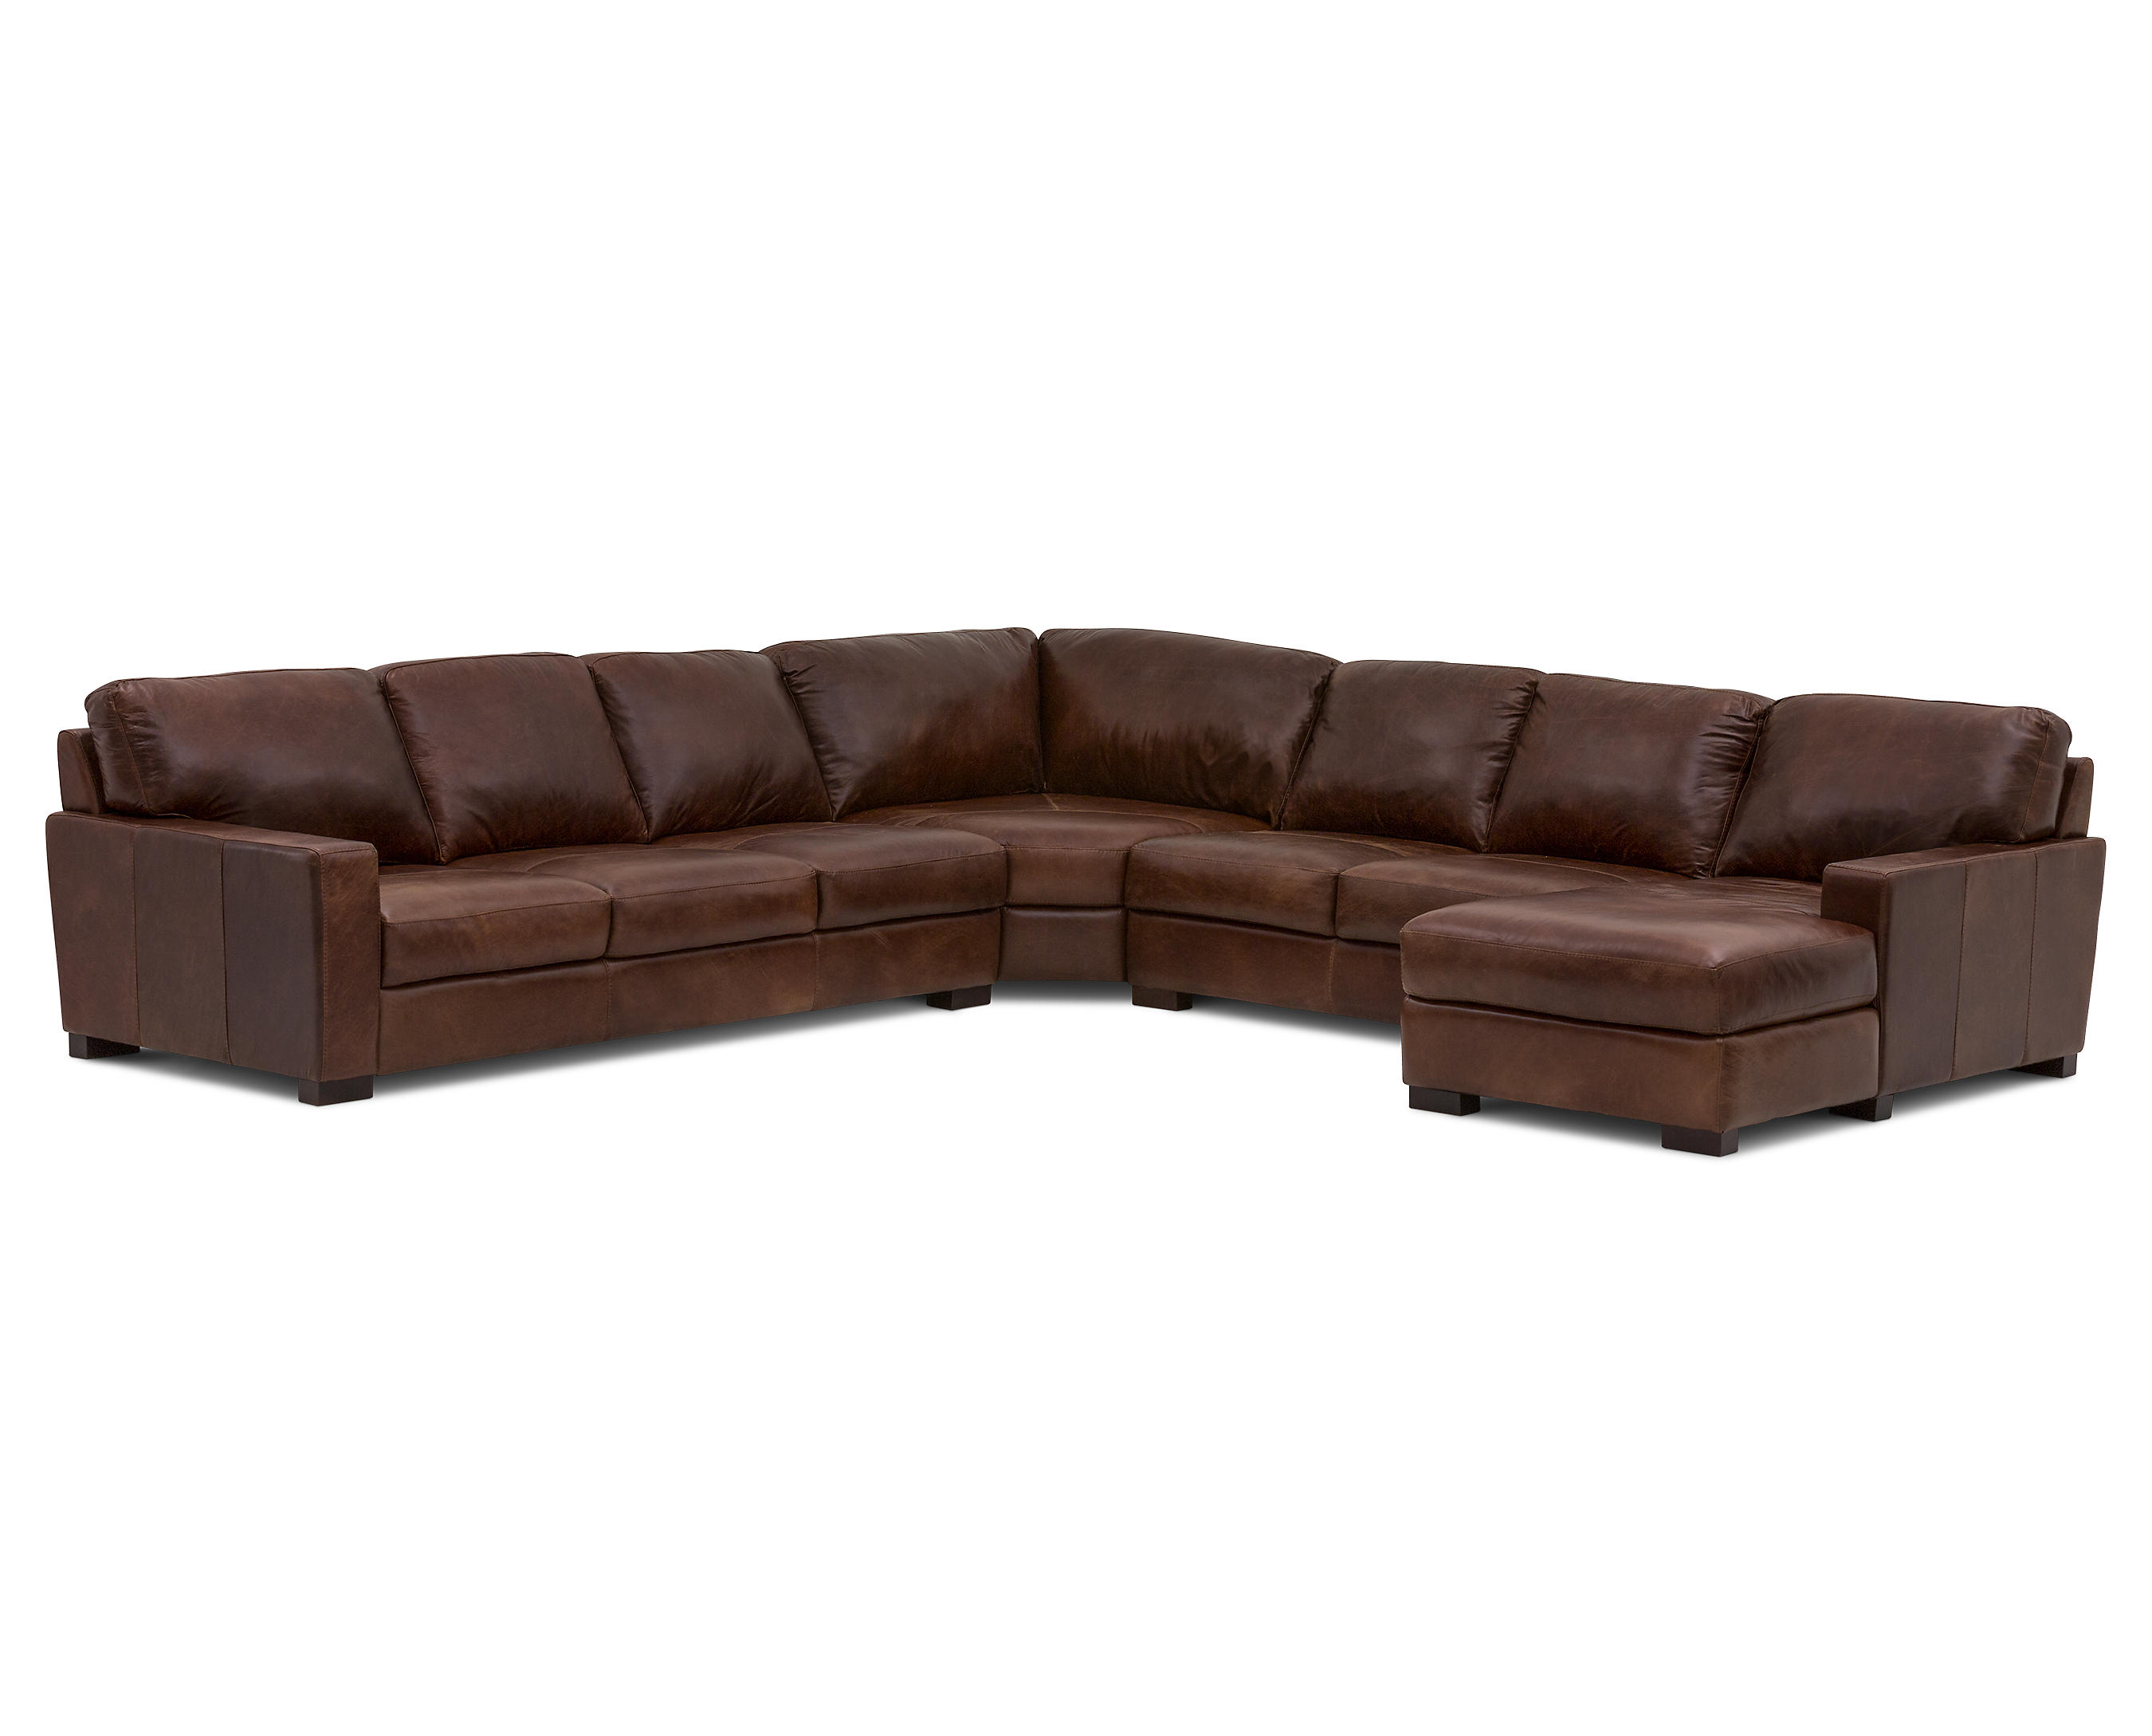 Durango 4 Pc Chaise Sectional, Red Leather Sofa Furniture Row